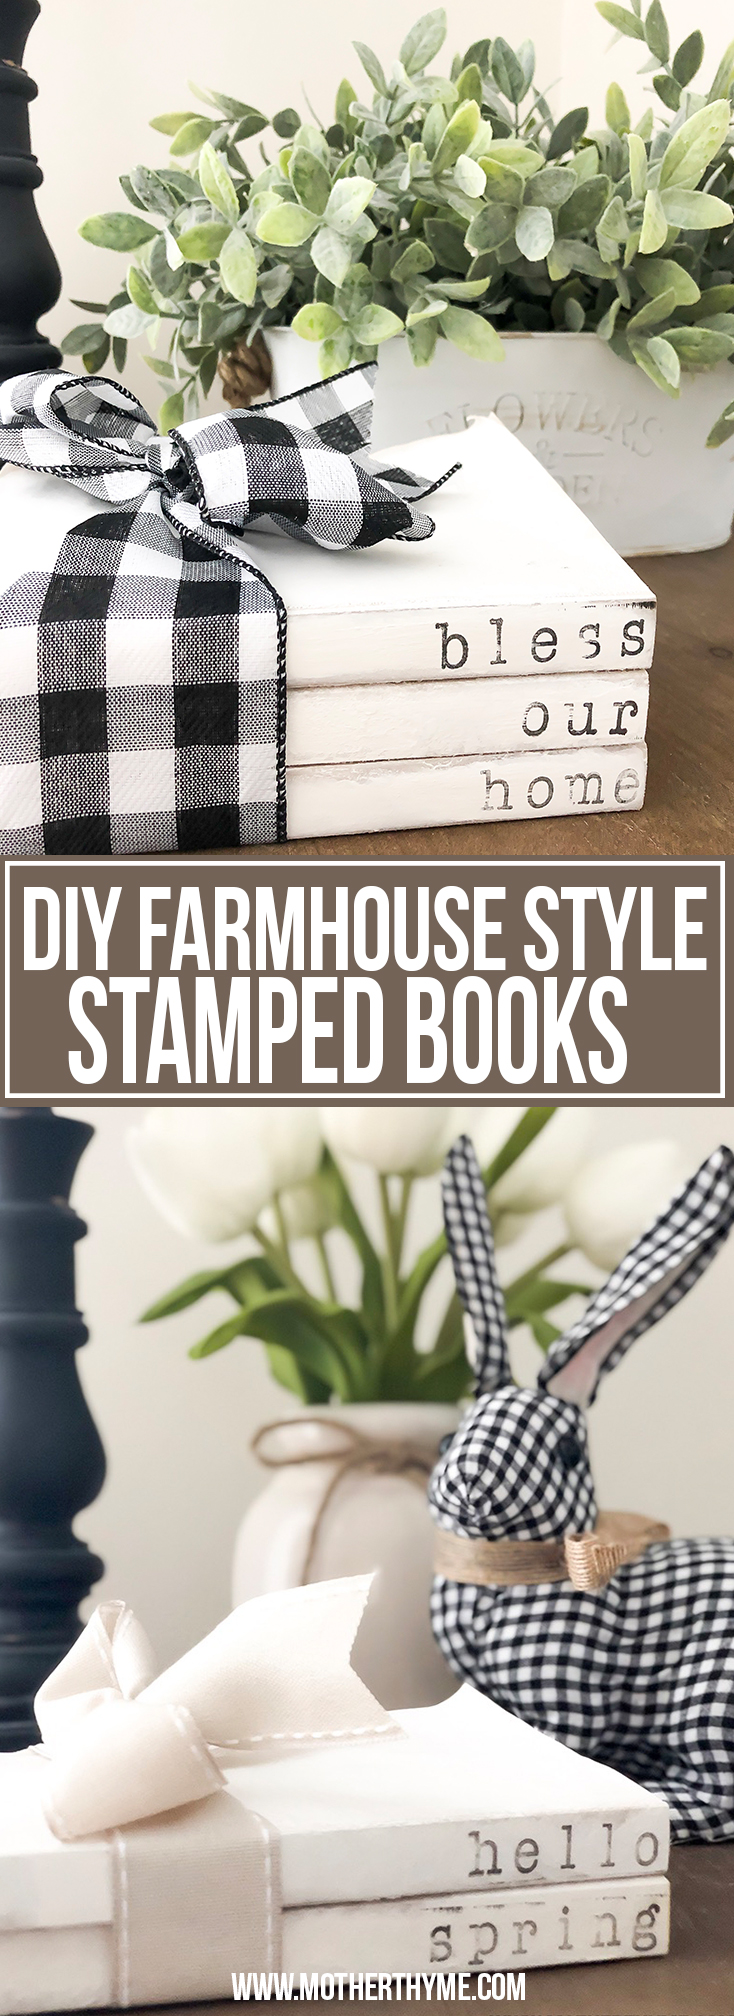 DIY FARMHOUSE STYLED STAMPED BOOKS